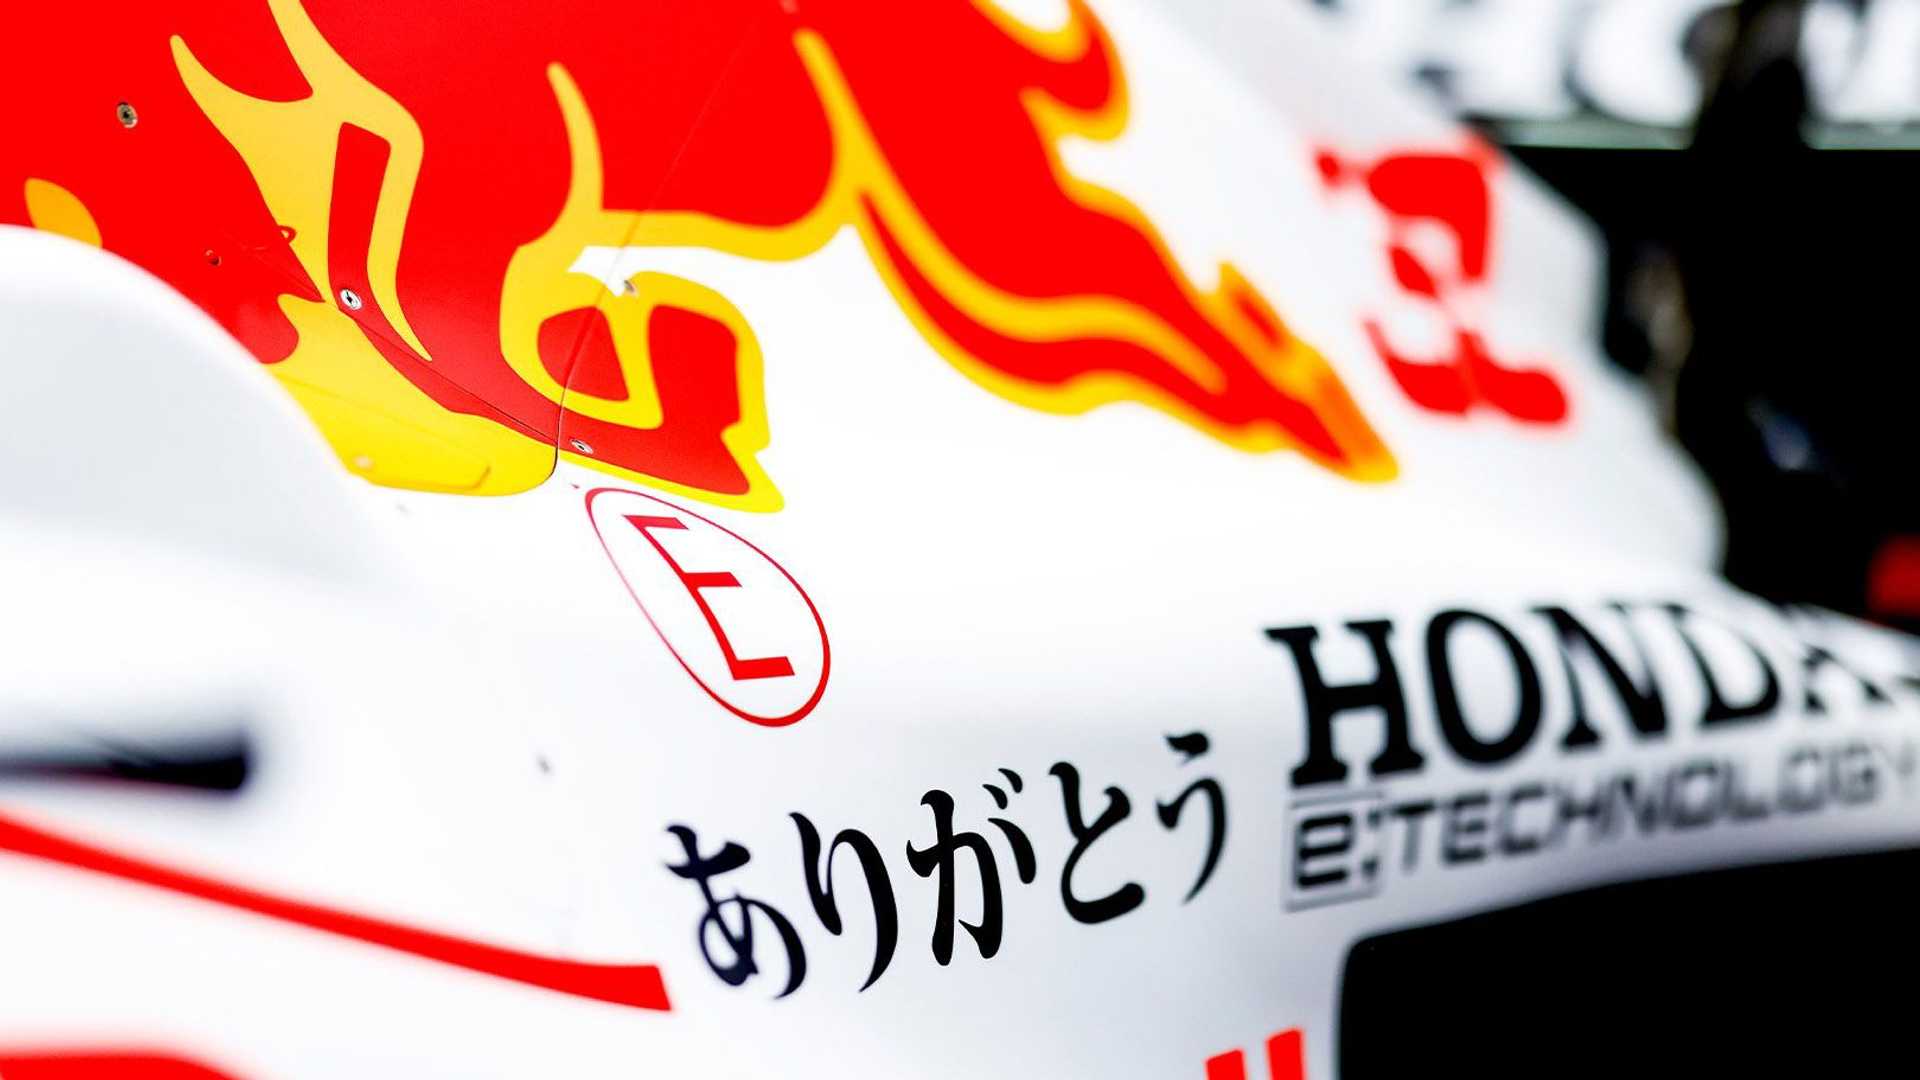 F1 Red Bull Reveals White Honda Thank You Livery For Turkish Gp